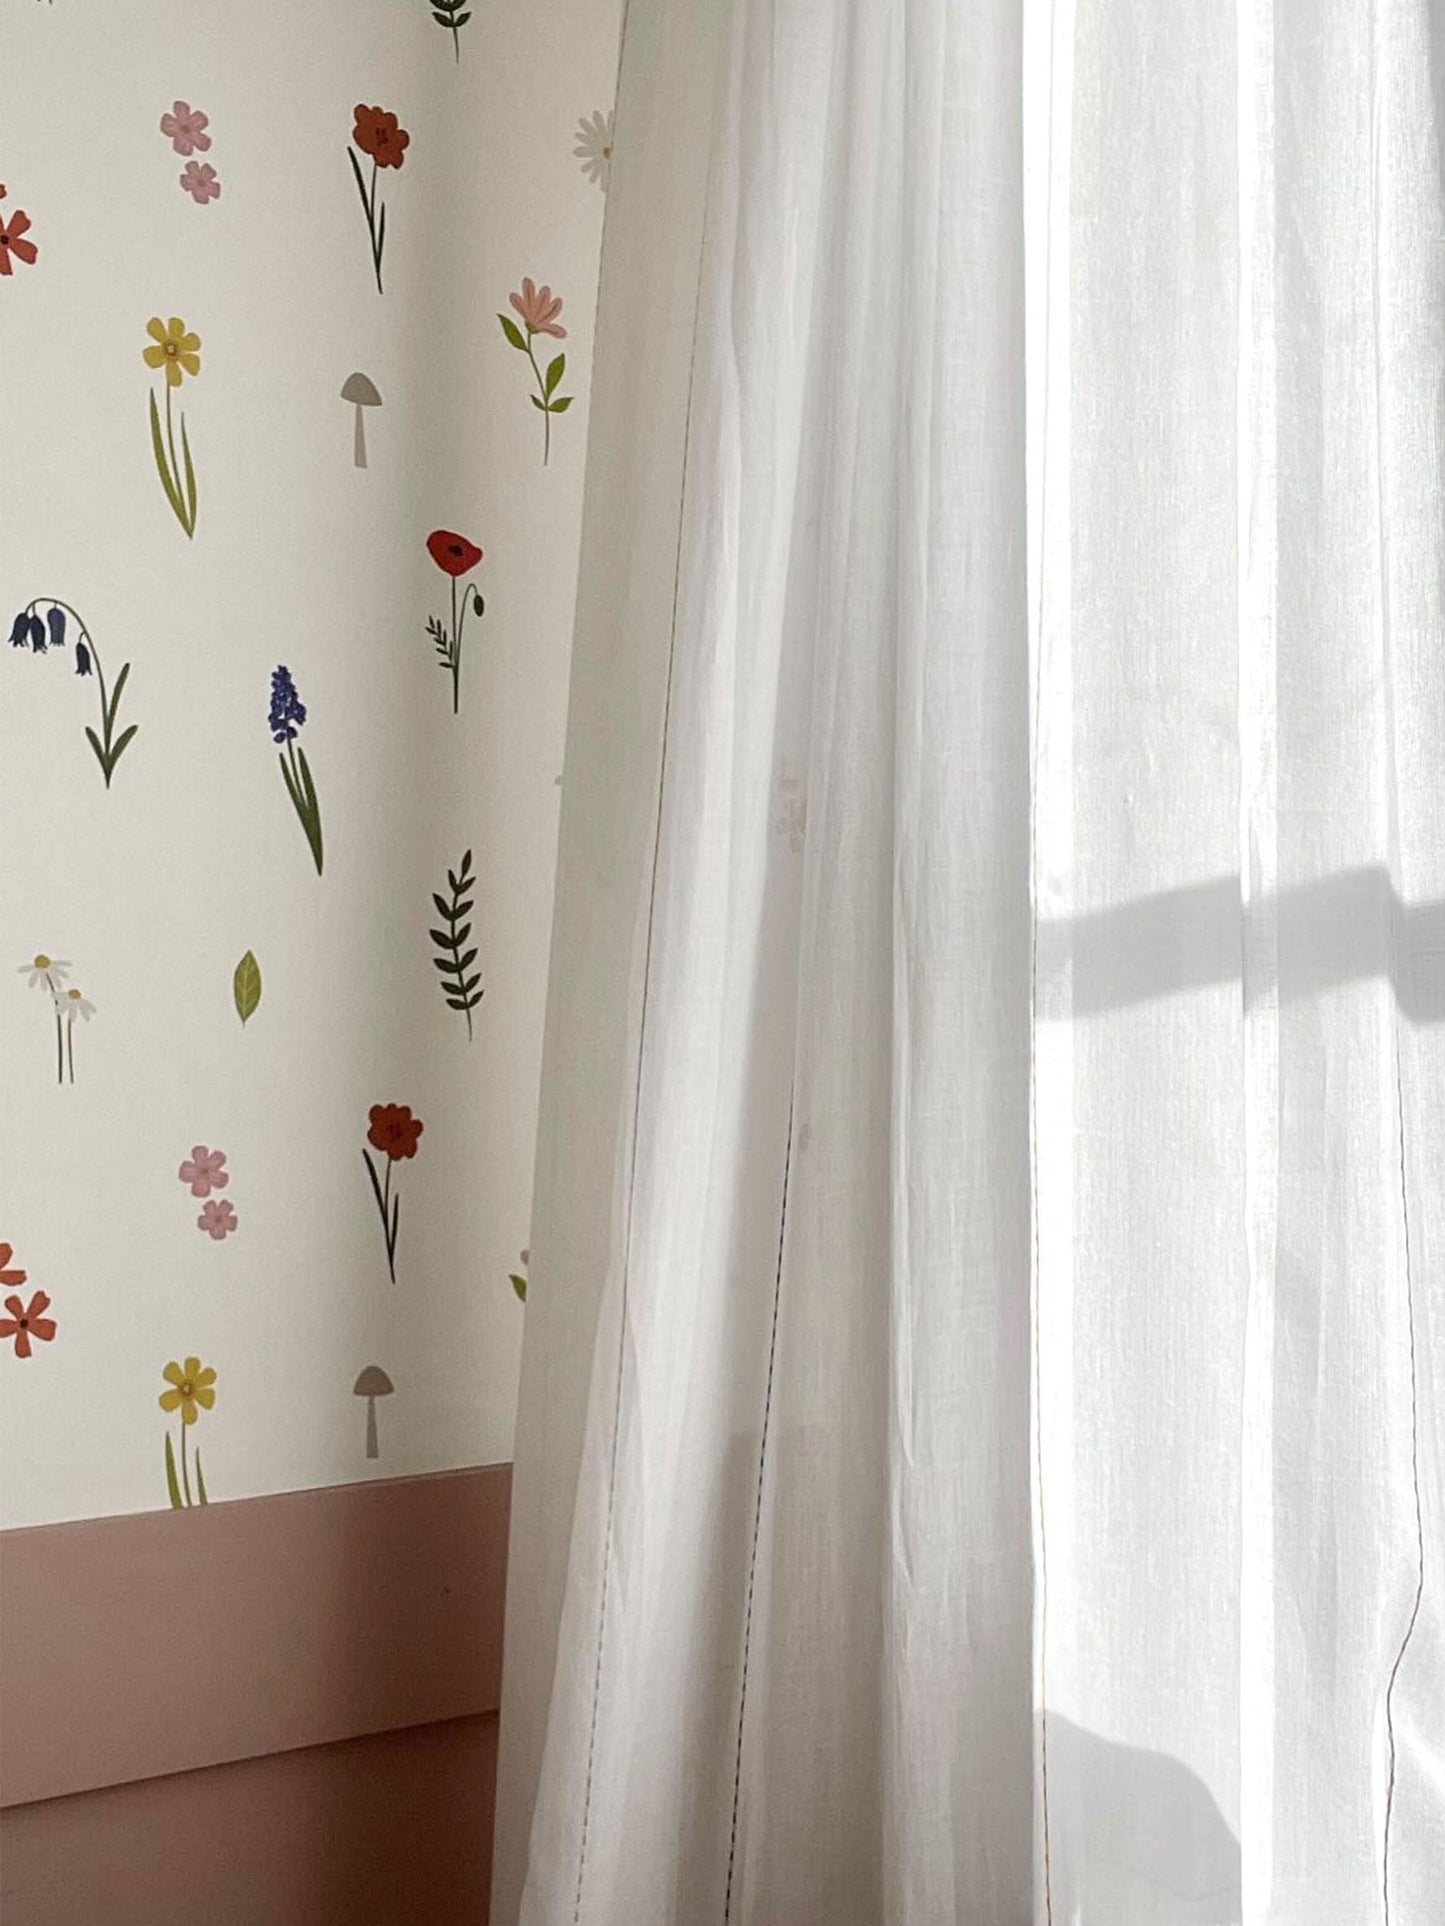 Forest Flower luxury children's wallpaper in girls bedroom above pink wall panelling with sheer white curtains